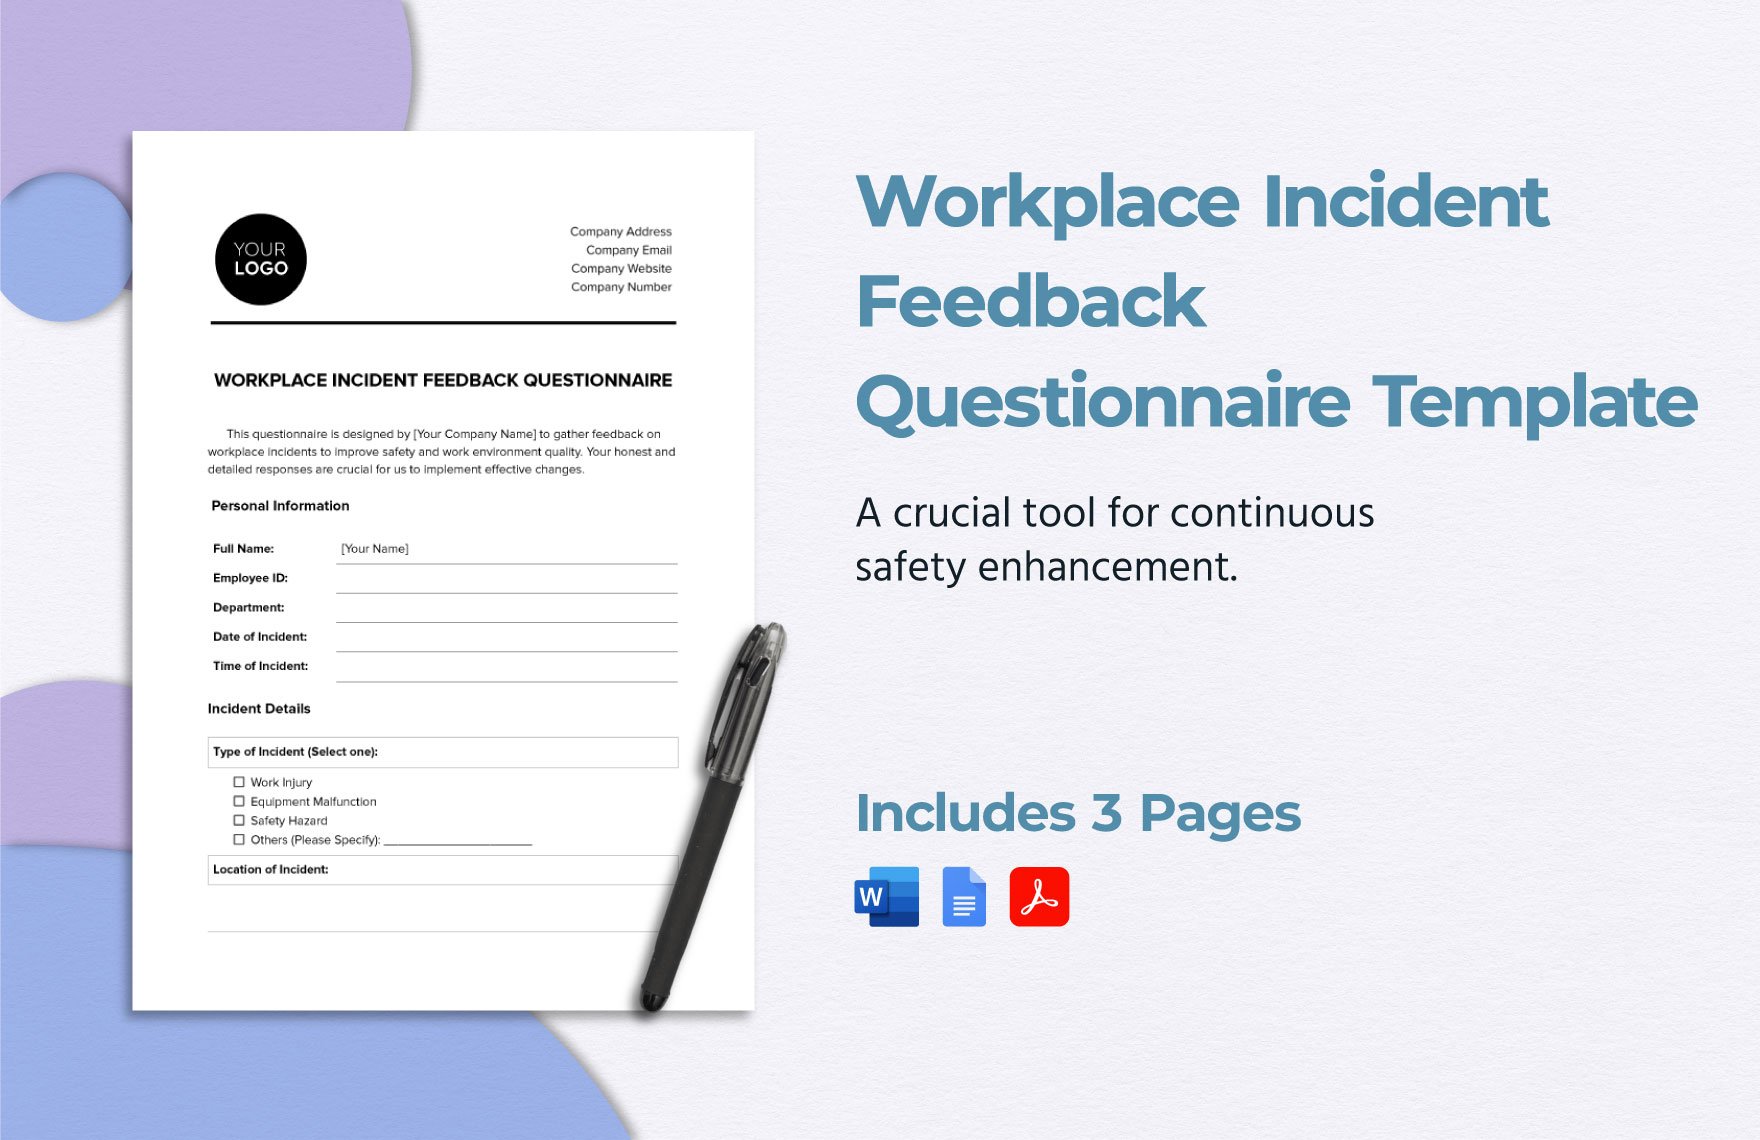 Workplace Incident Feedback Questionnaire Template in Word, Google Docs, PDF